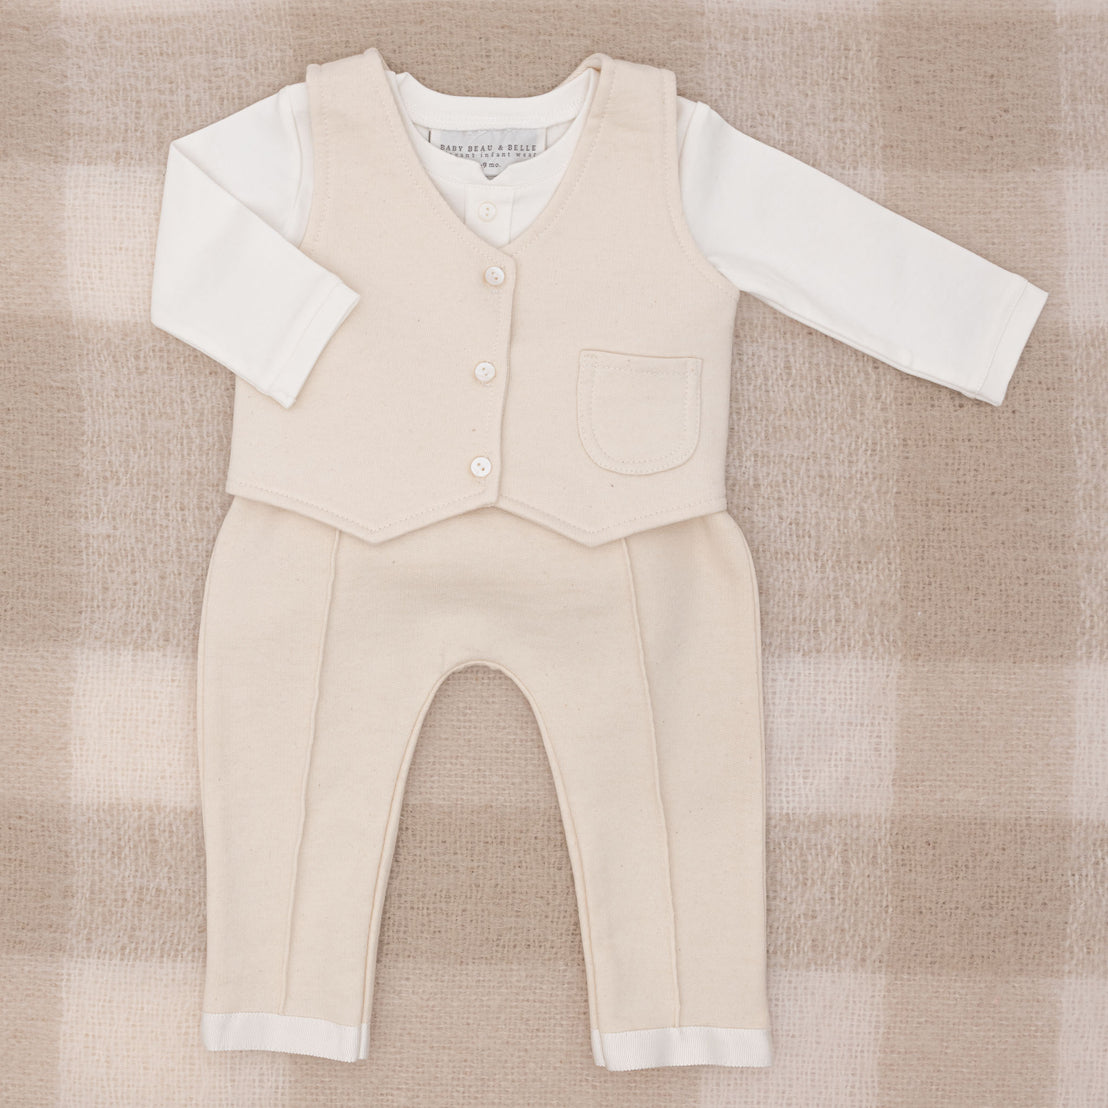 Flat lay photo of the Braden Vest Pants Suit, including the vest, pants, and onesie